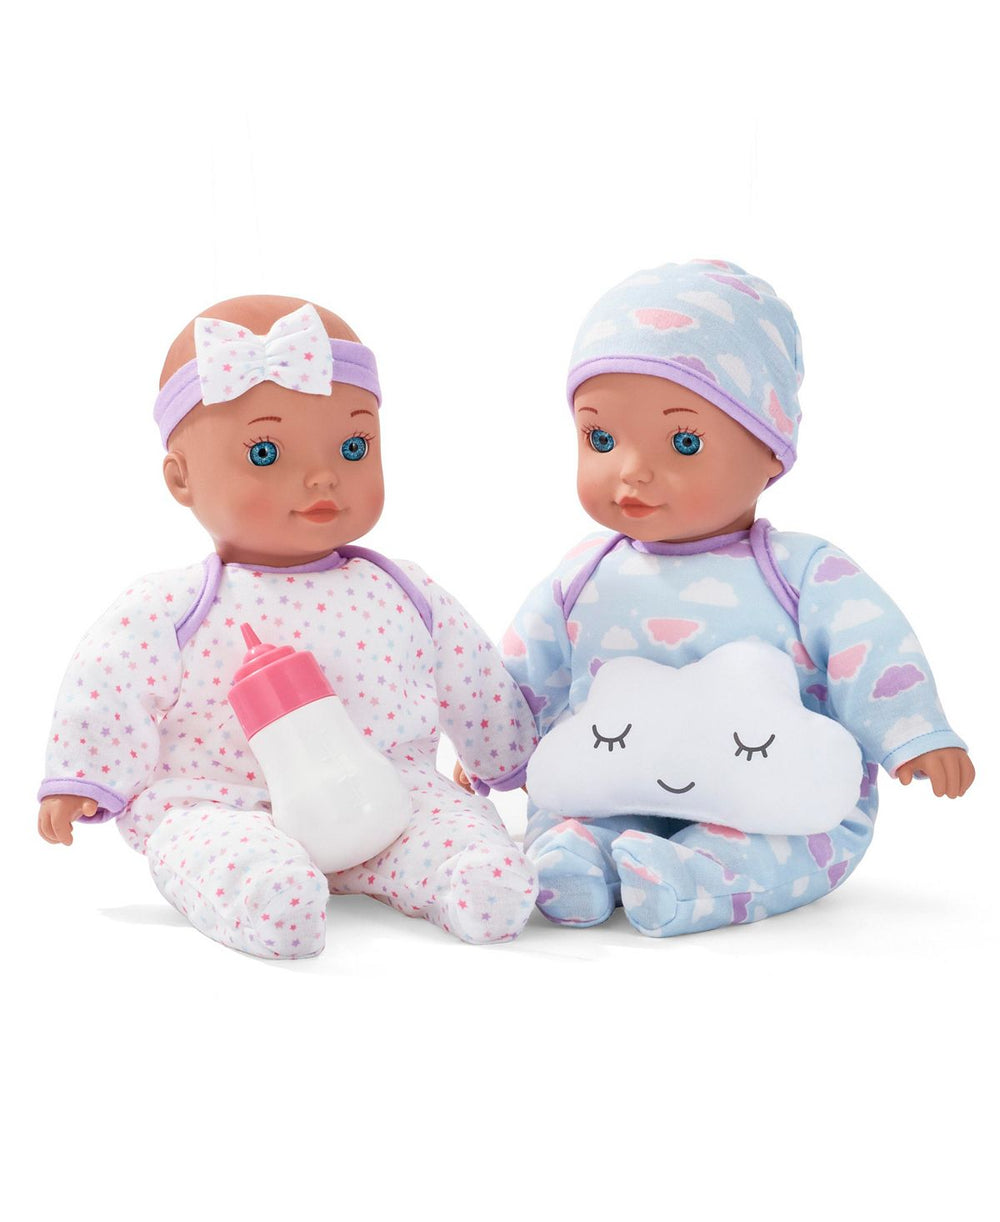 Toys R Us Cuddle Twins 12" Interactive Baby Dolls Set with Accessories